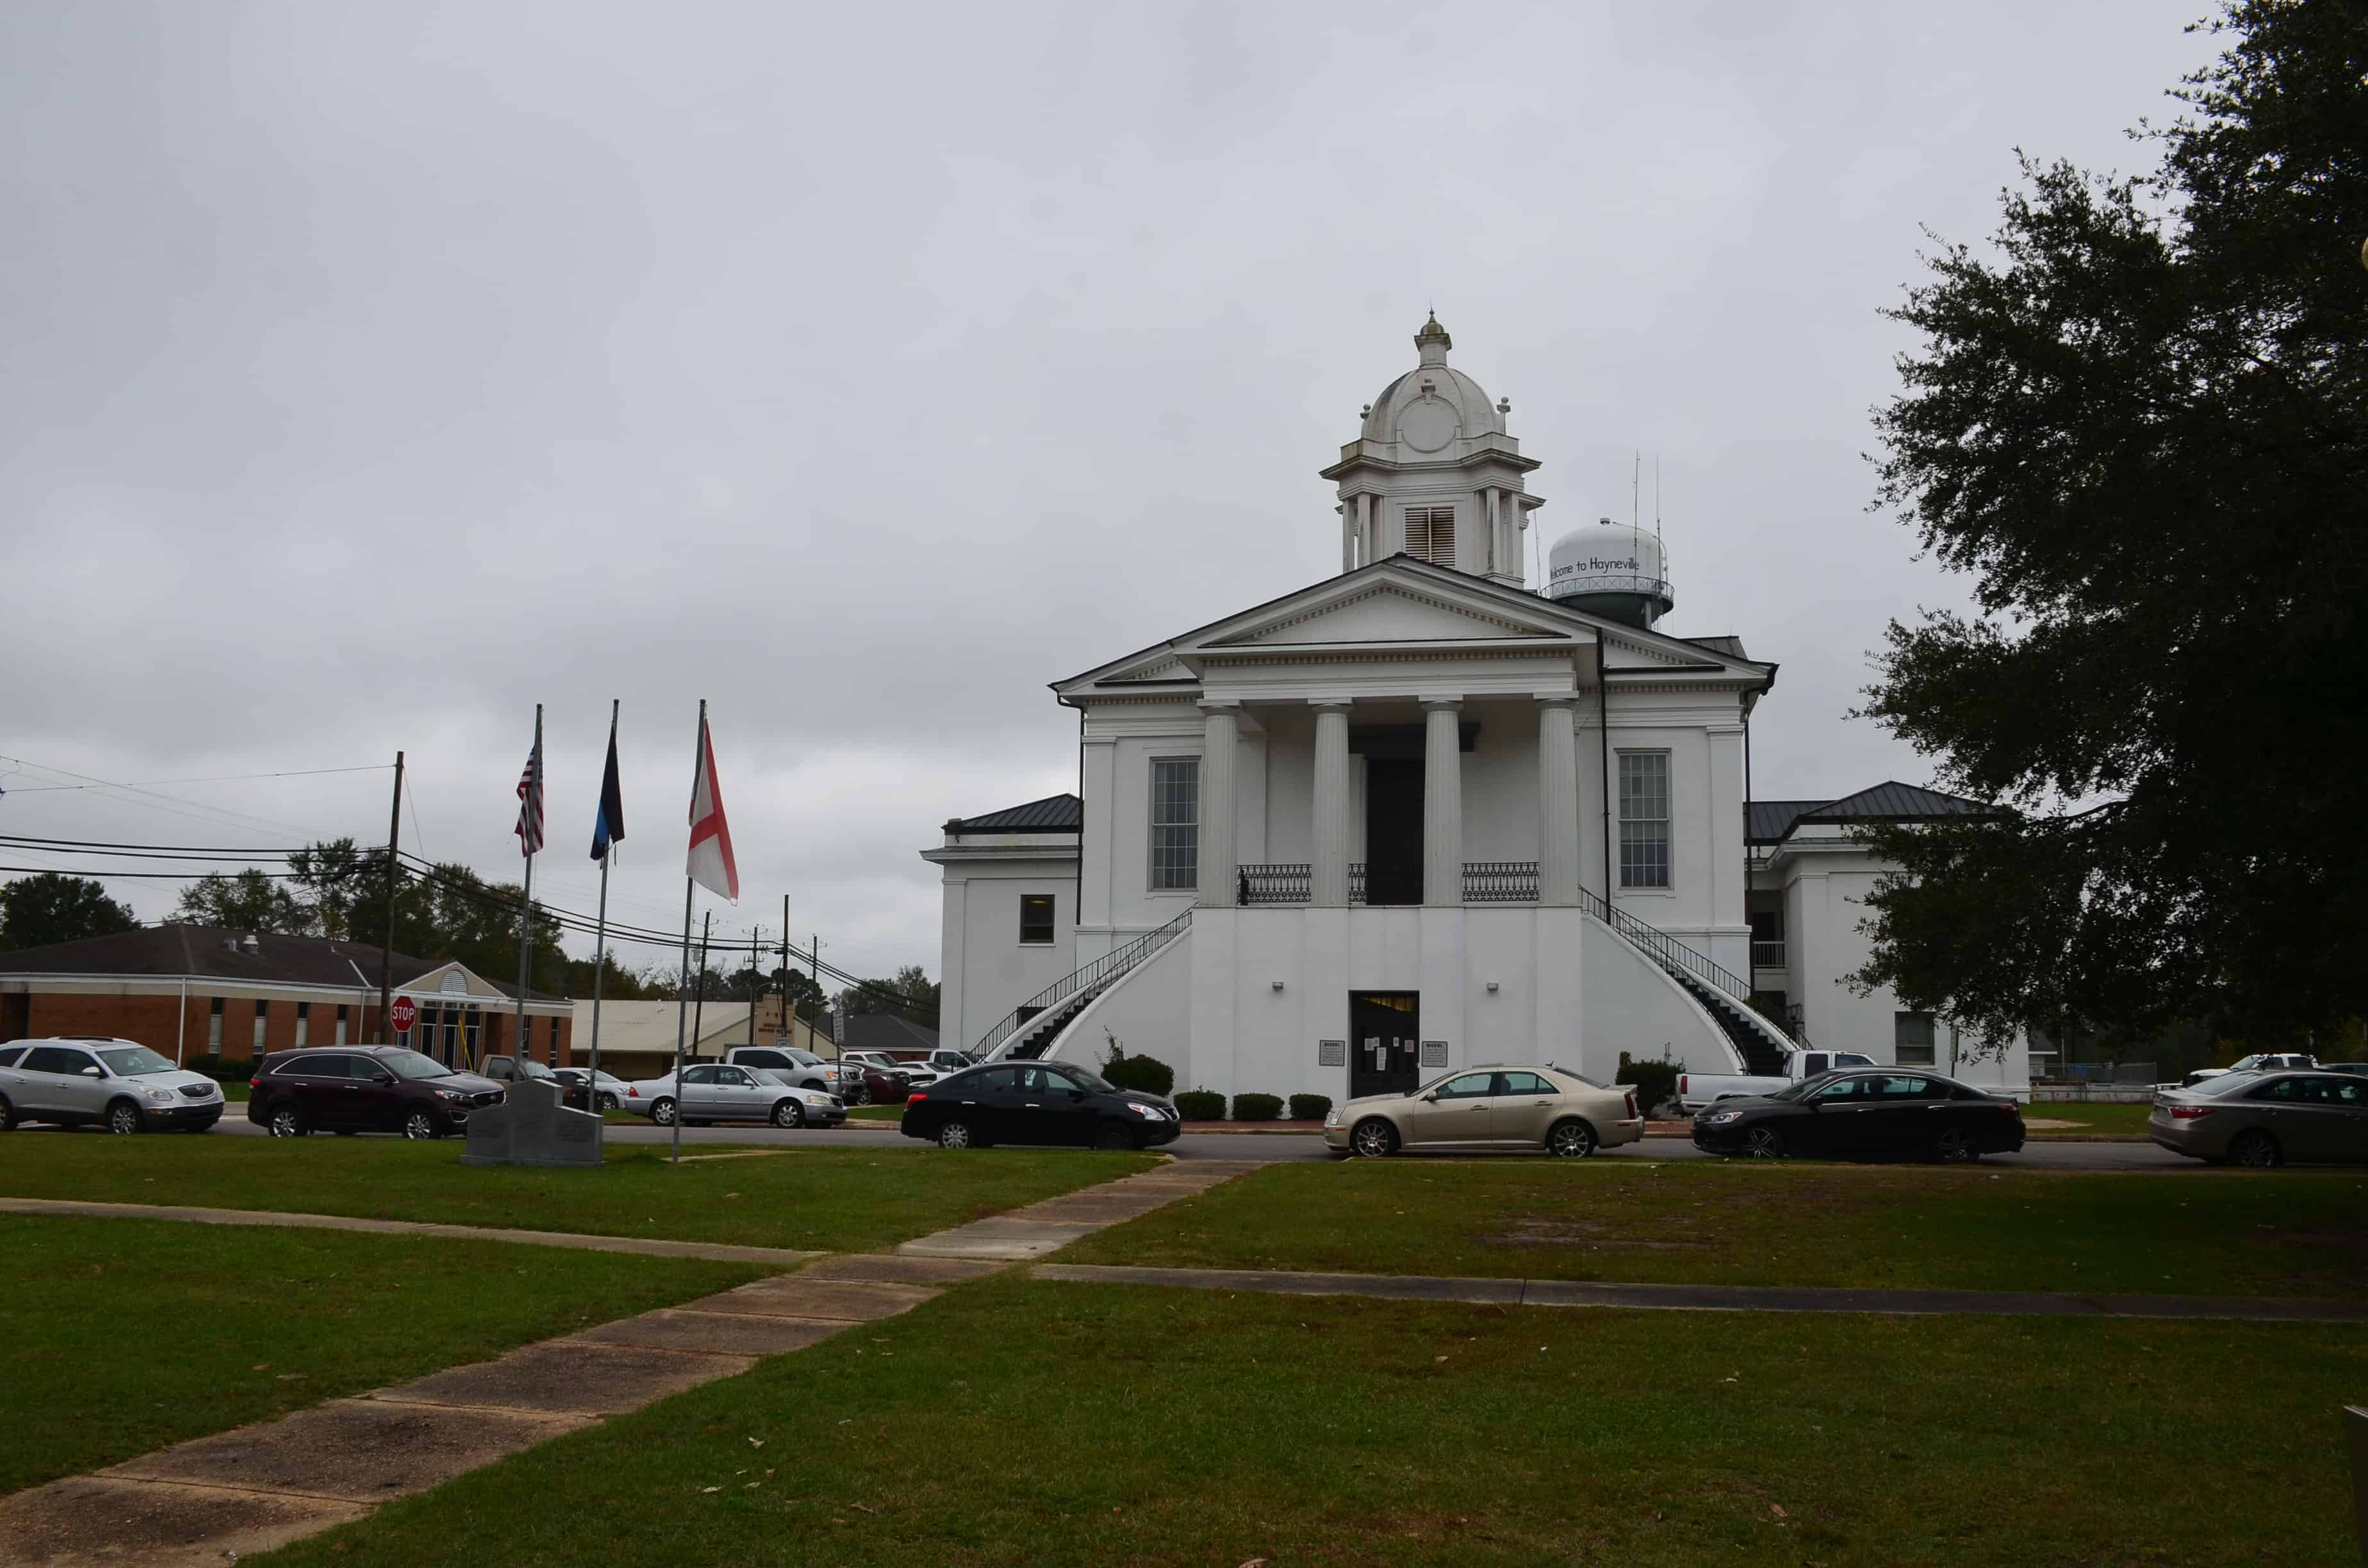 Lowndes County Courthouse in Hayneville, Alabama